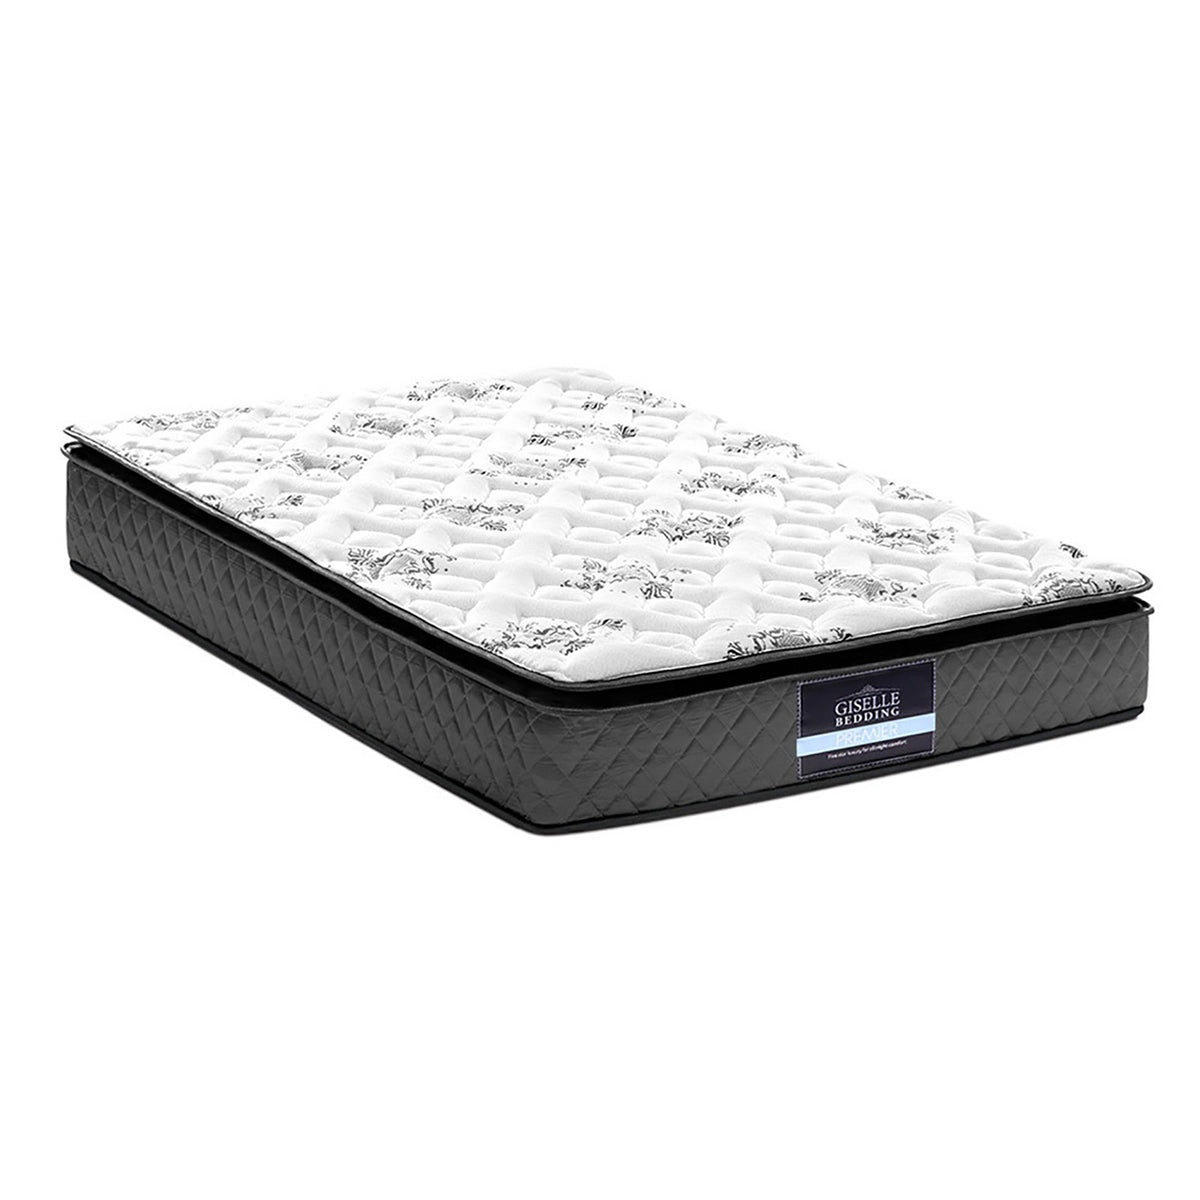 Giselle Bedding Rocco Bonnell Spring Mattress 24cm Thick Single